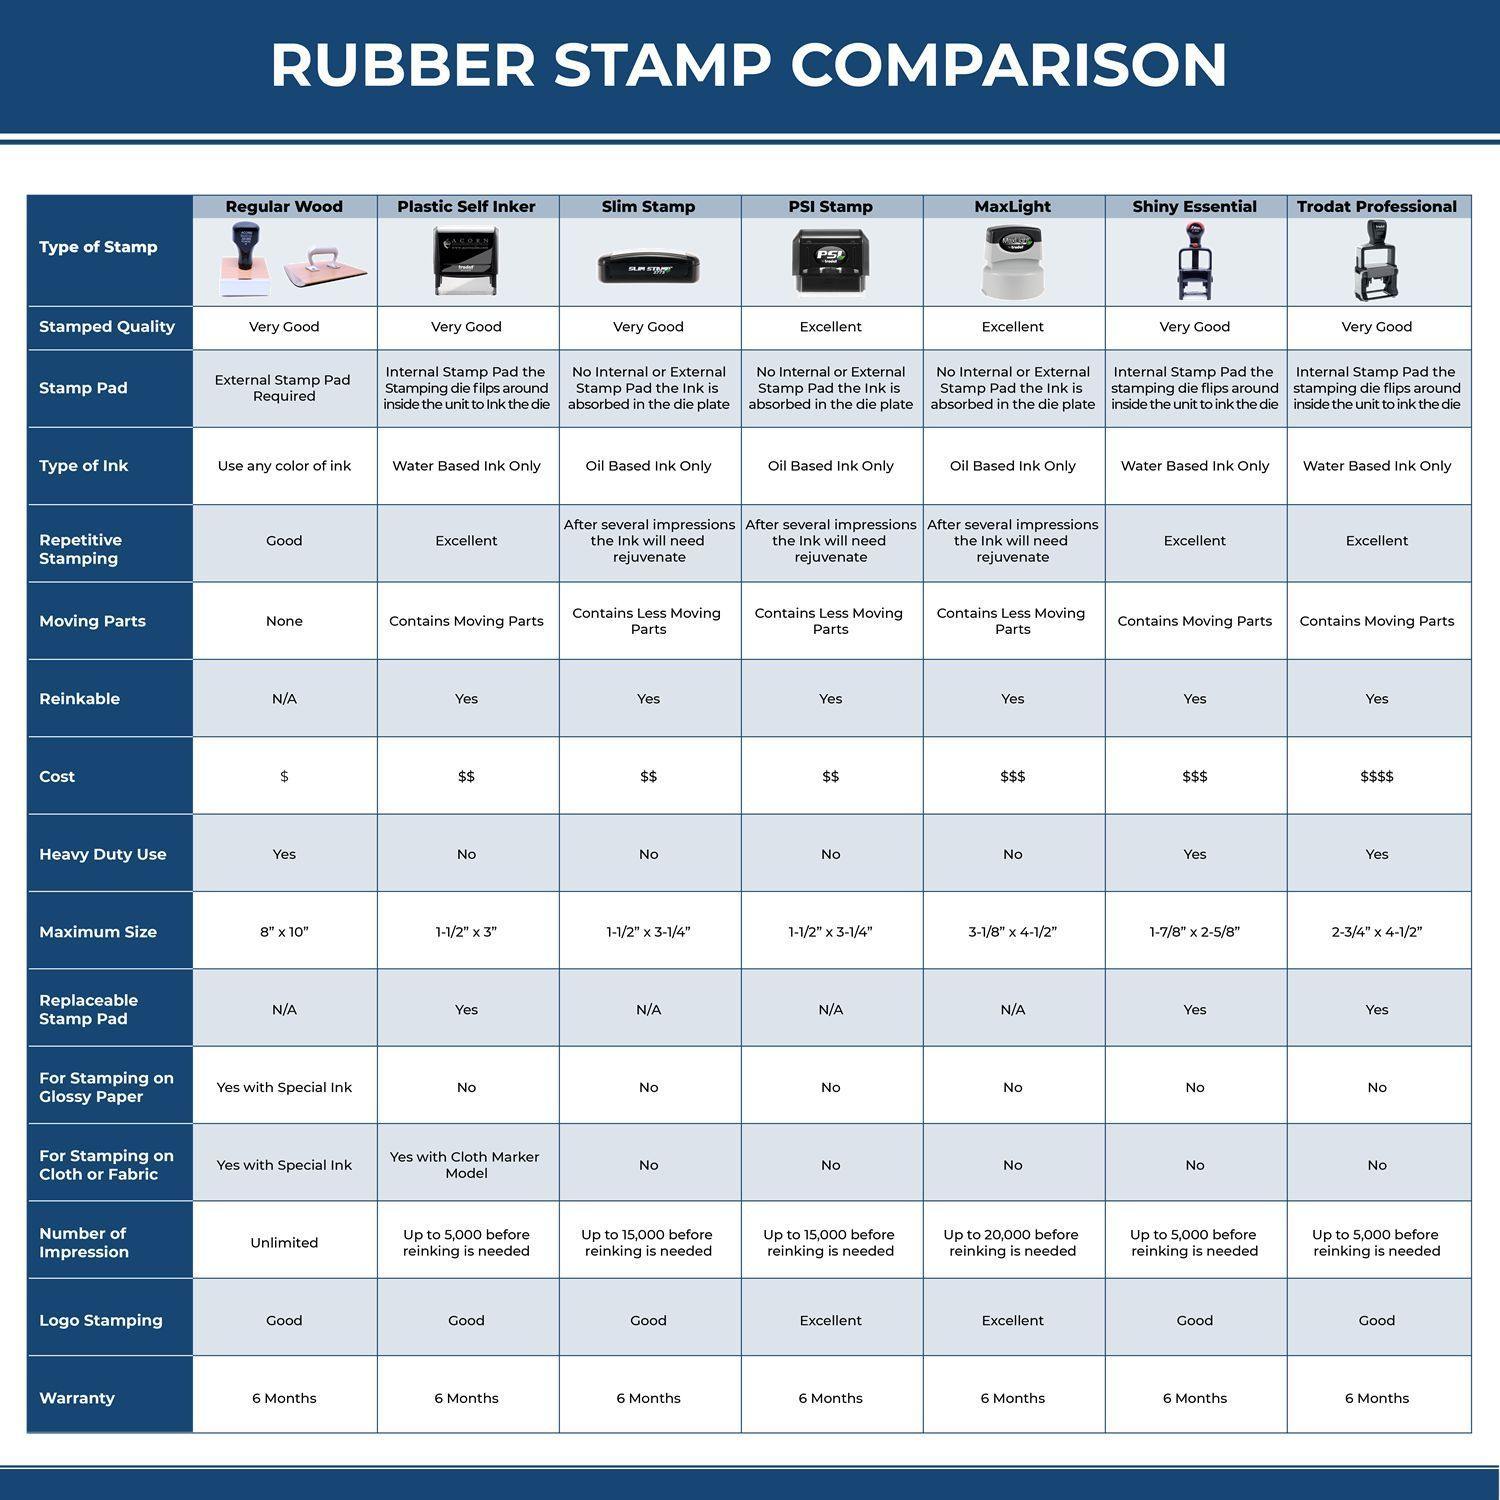 Large Narrow Font Insurance Verified Rubber Stamp 4935R Rubber Stamp Comparison